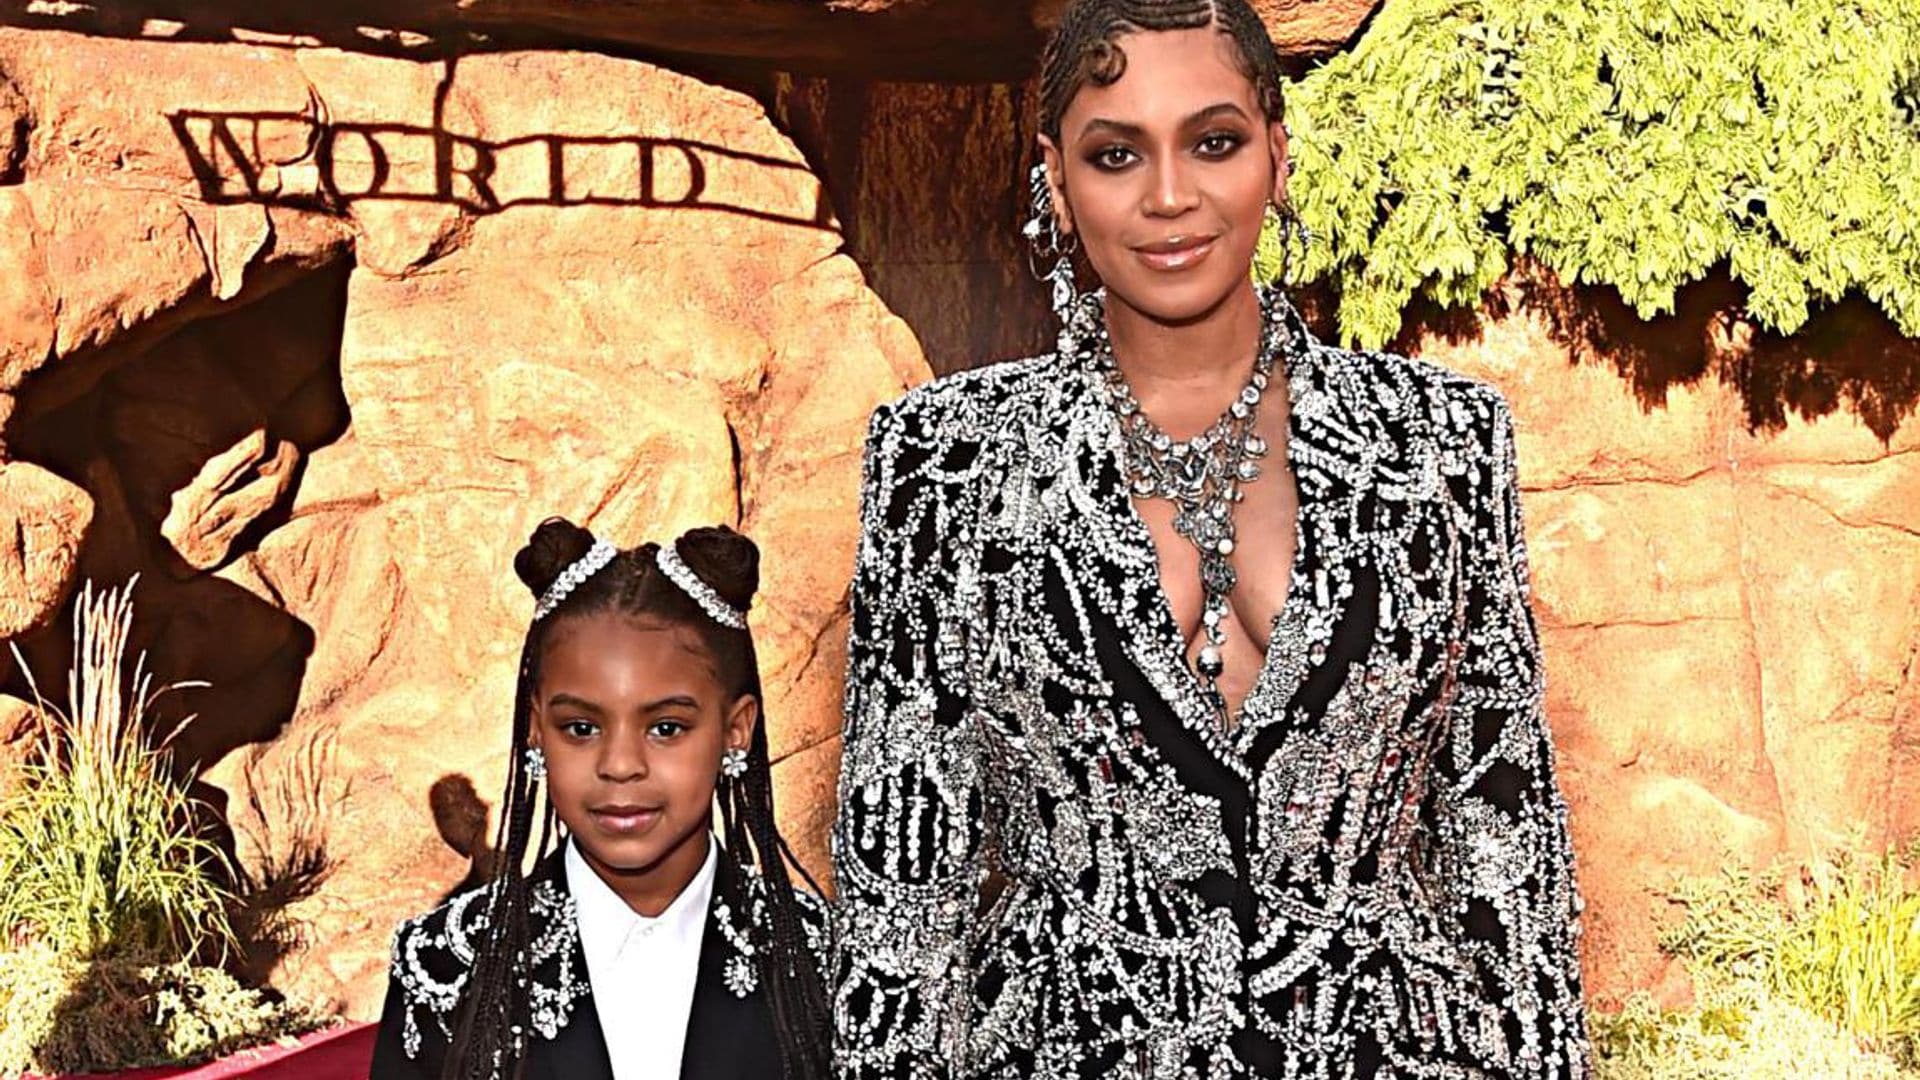 Beyonce's daughter Blue Ivy's new exciting gig revealed